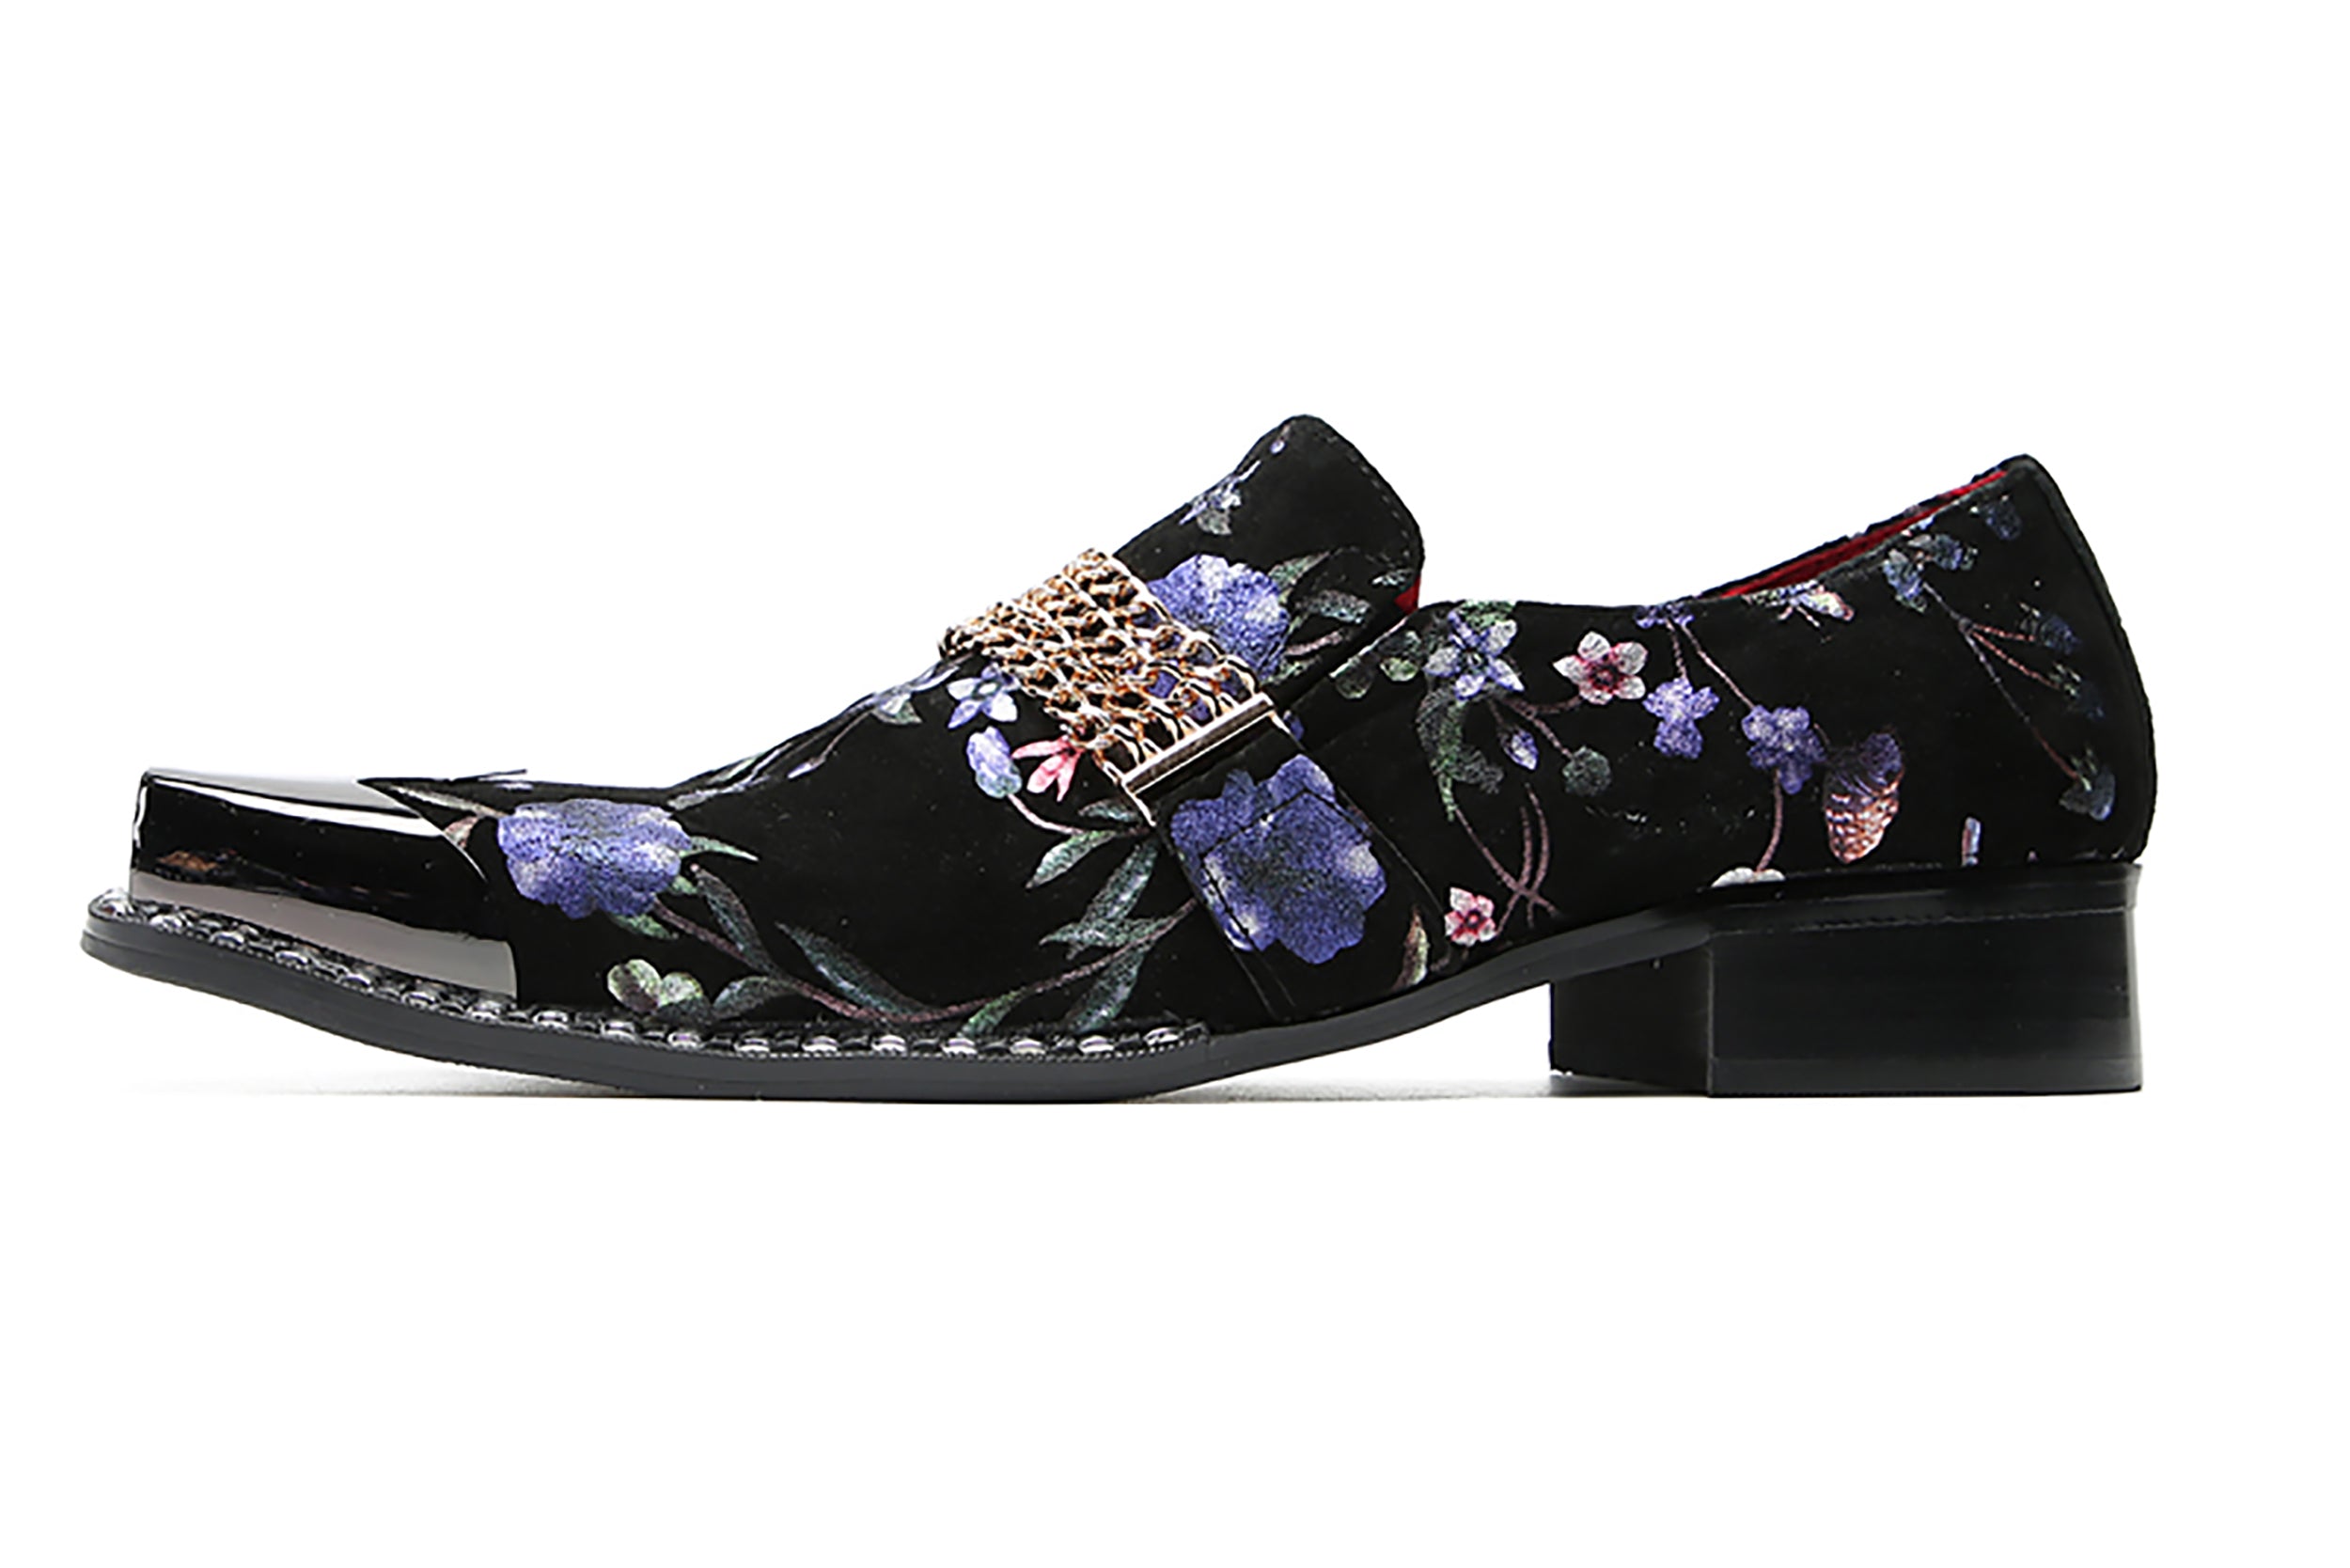 Men's Metal-Square Toe Flowers Western Penny Loafers